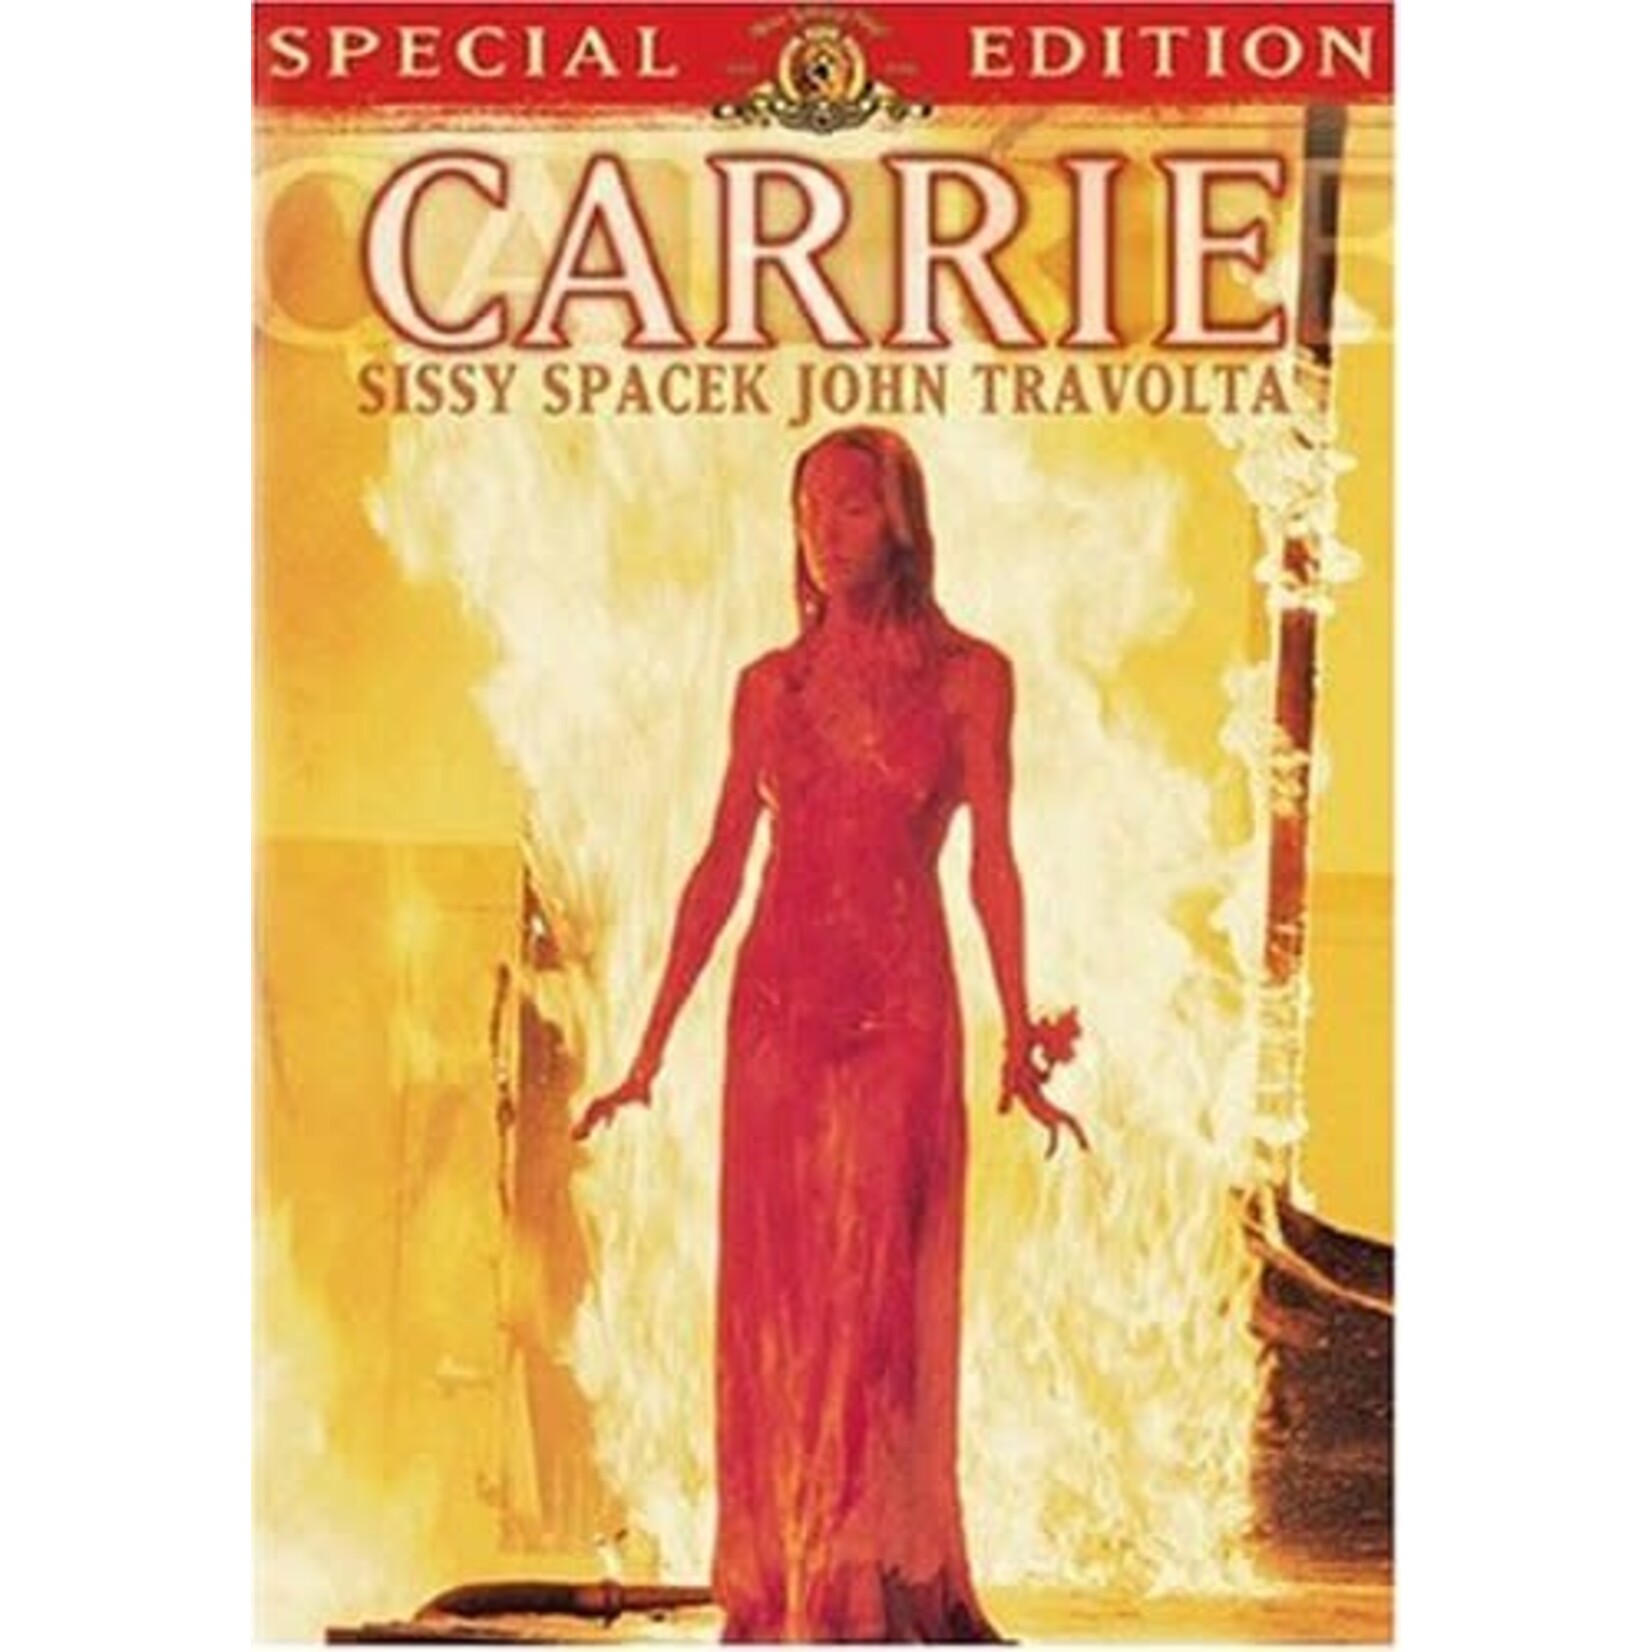 Carrie (1976) [USED DVD]